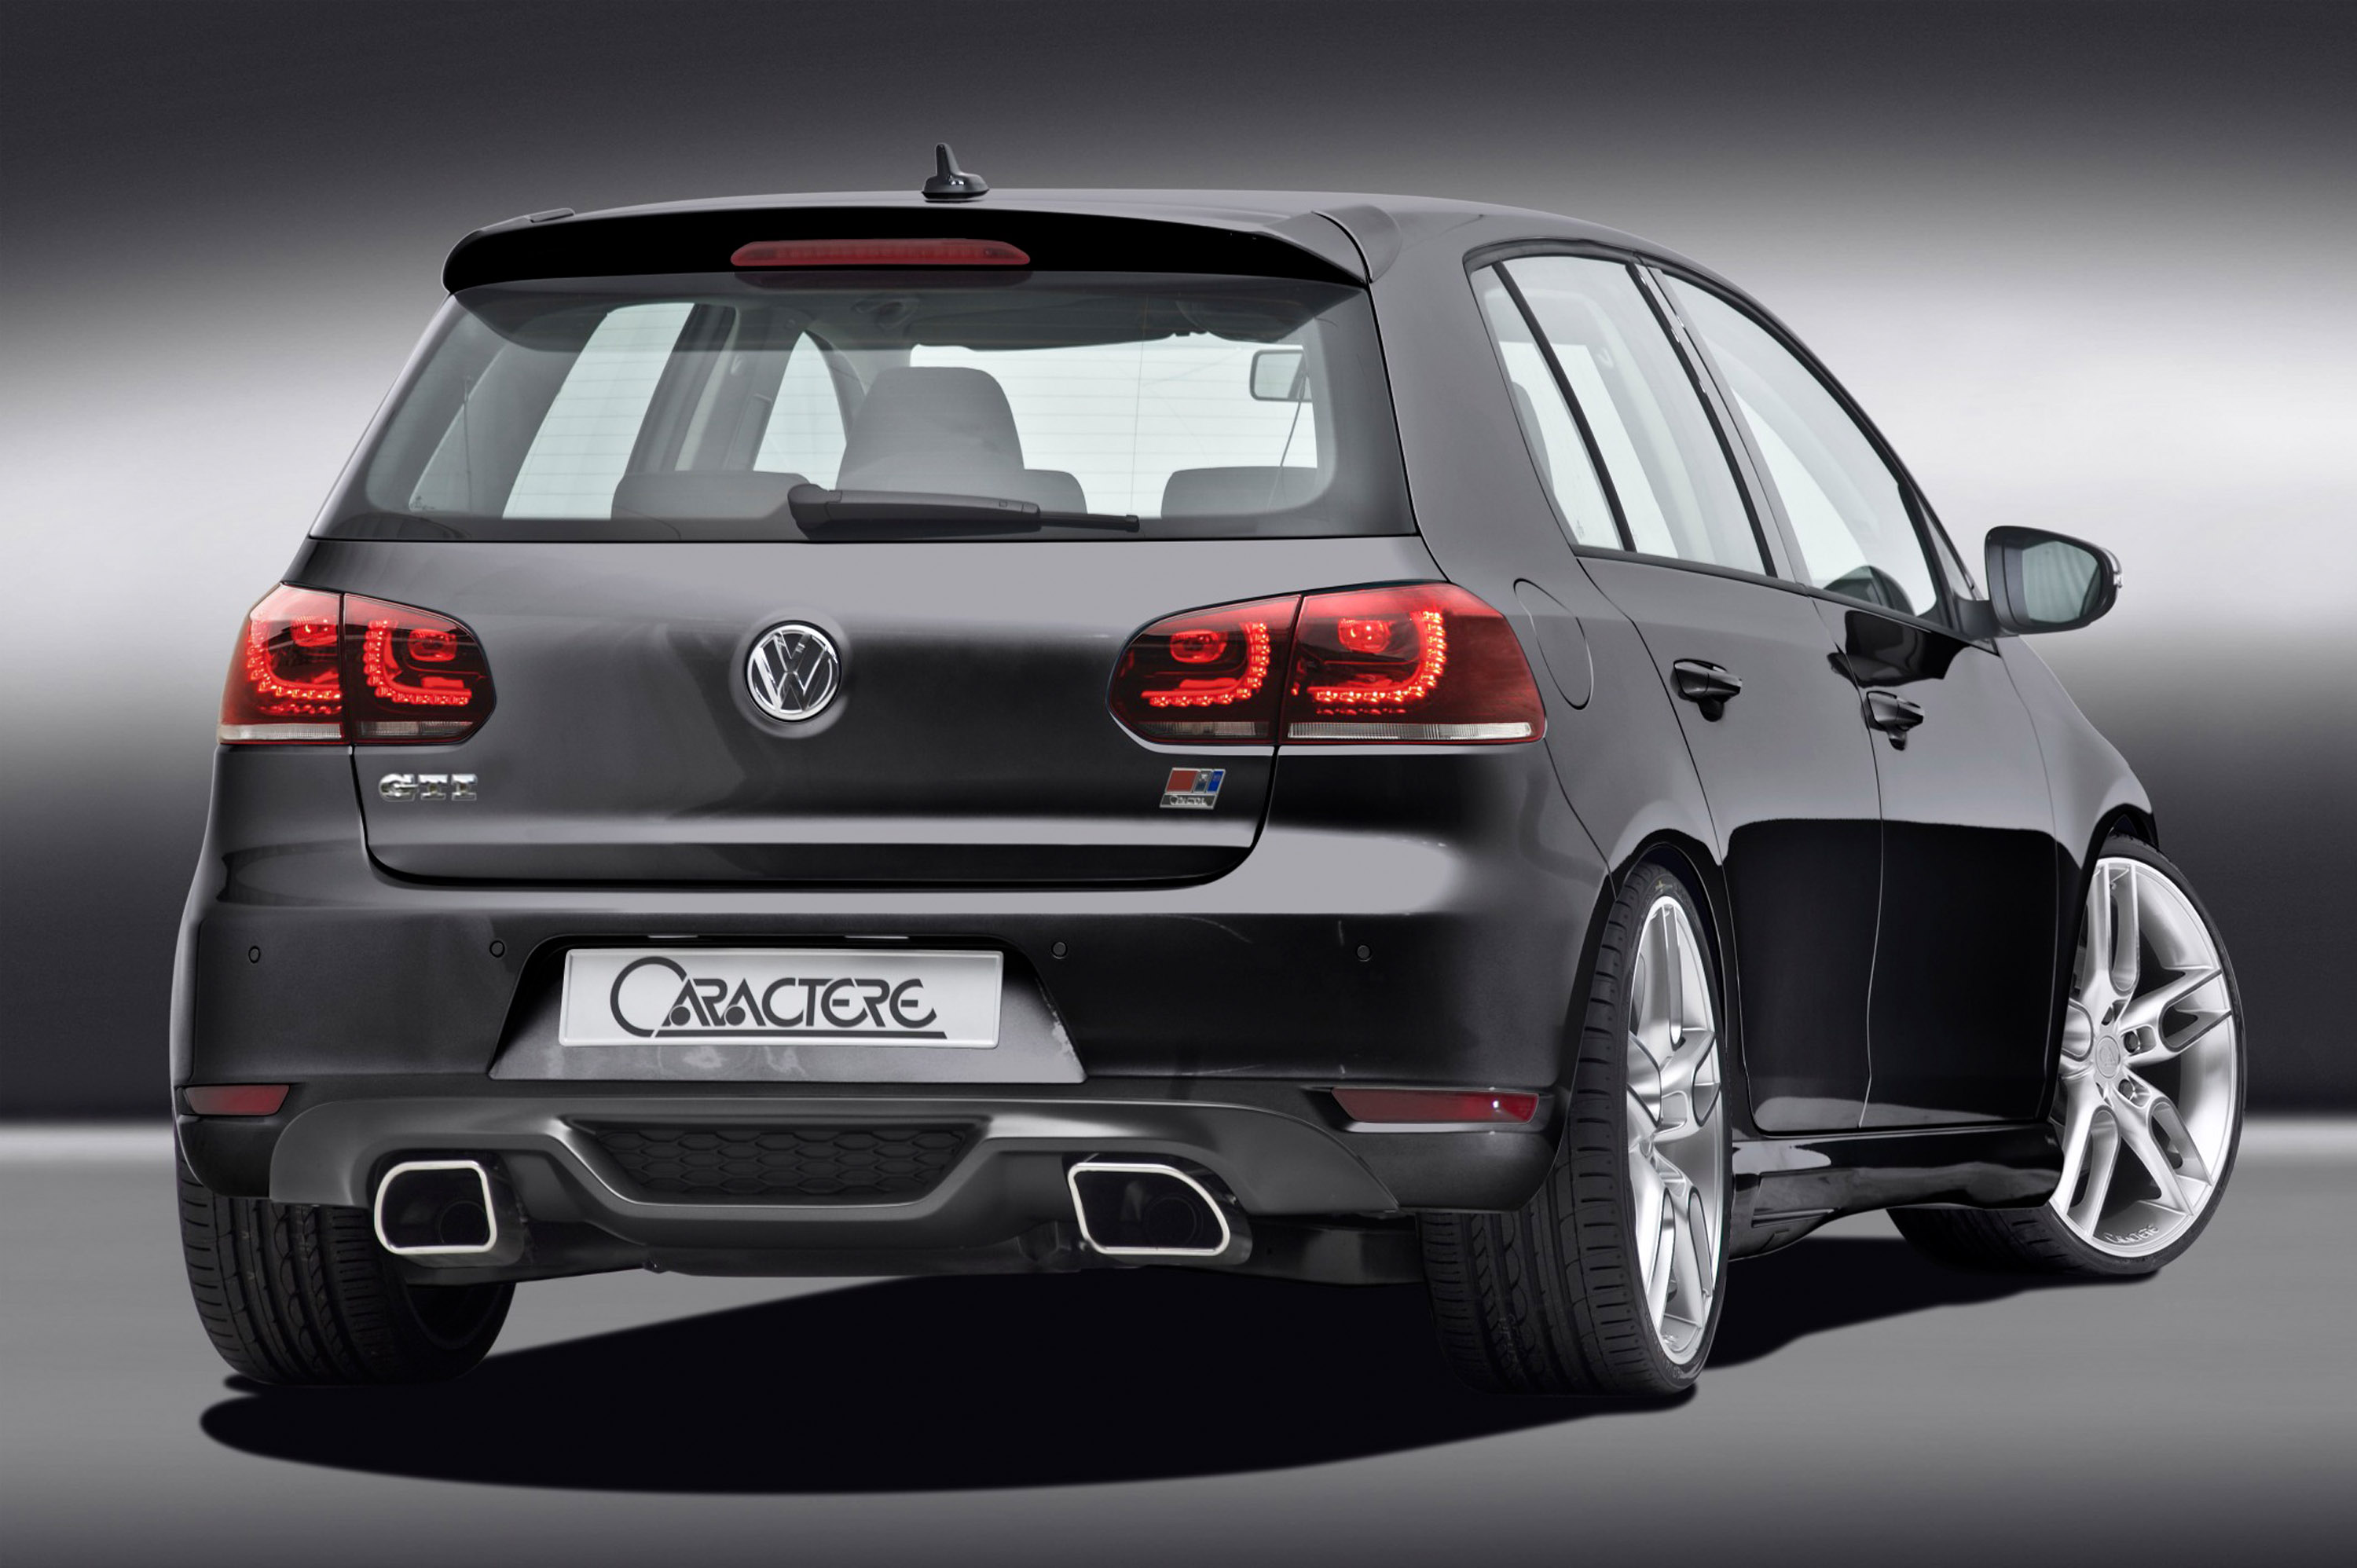 Caractere improves visually the VW Golf 6 GTi